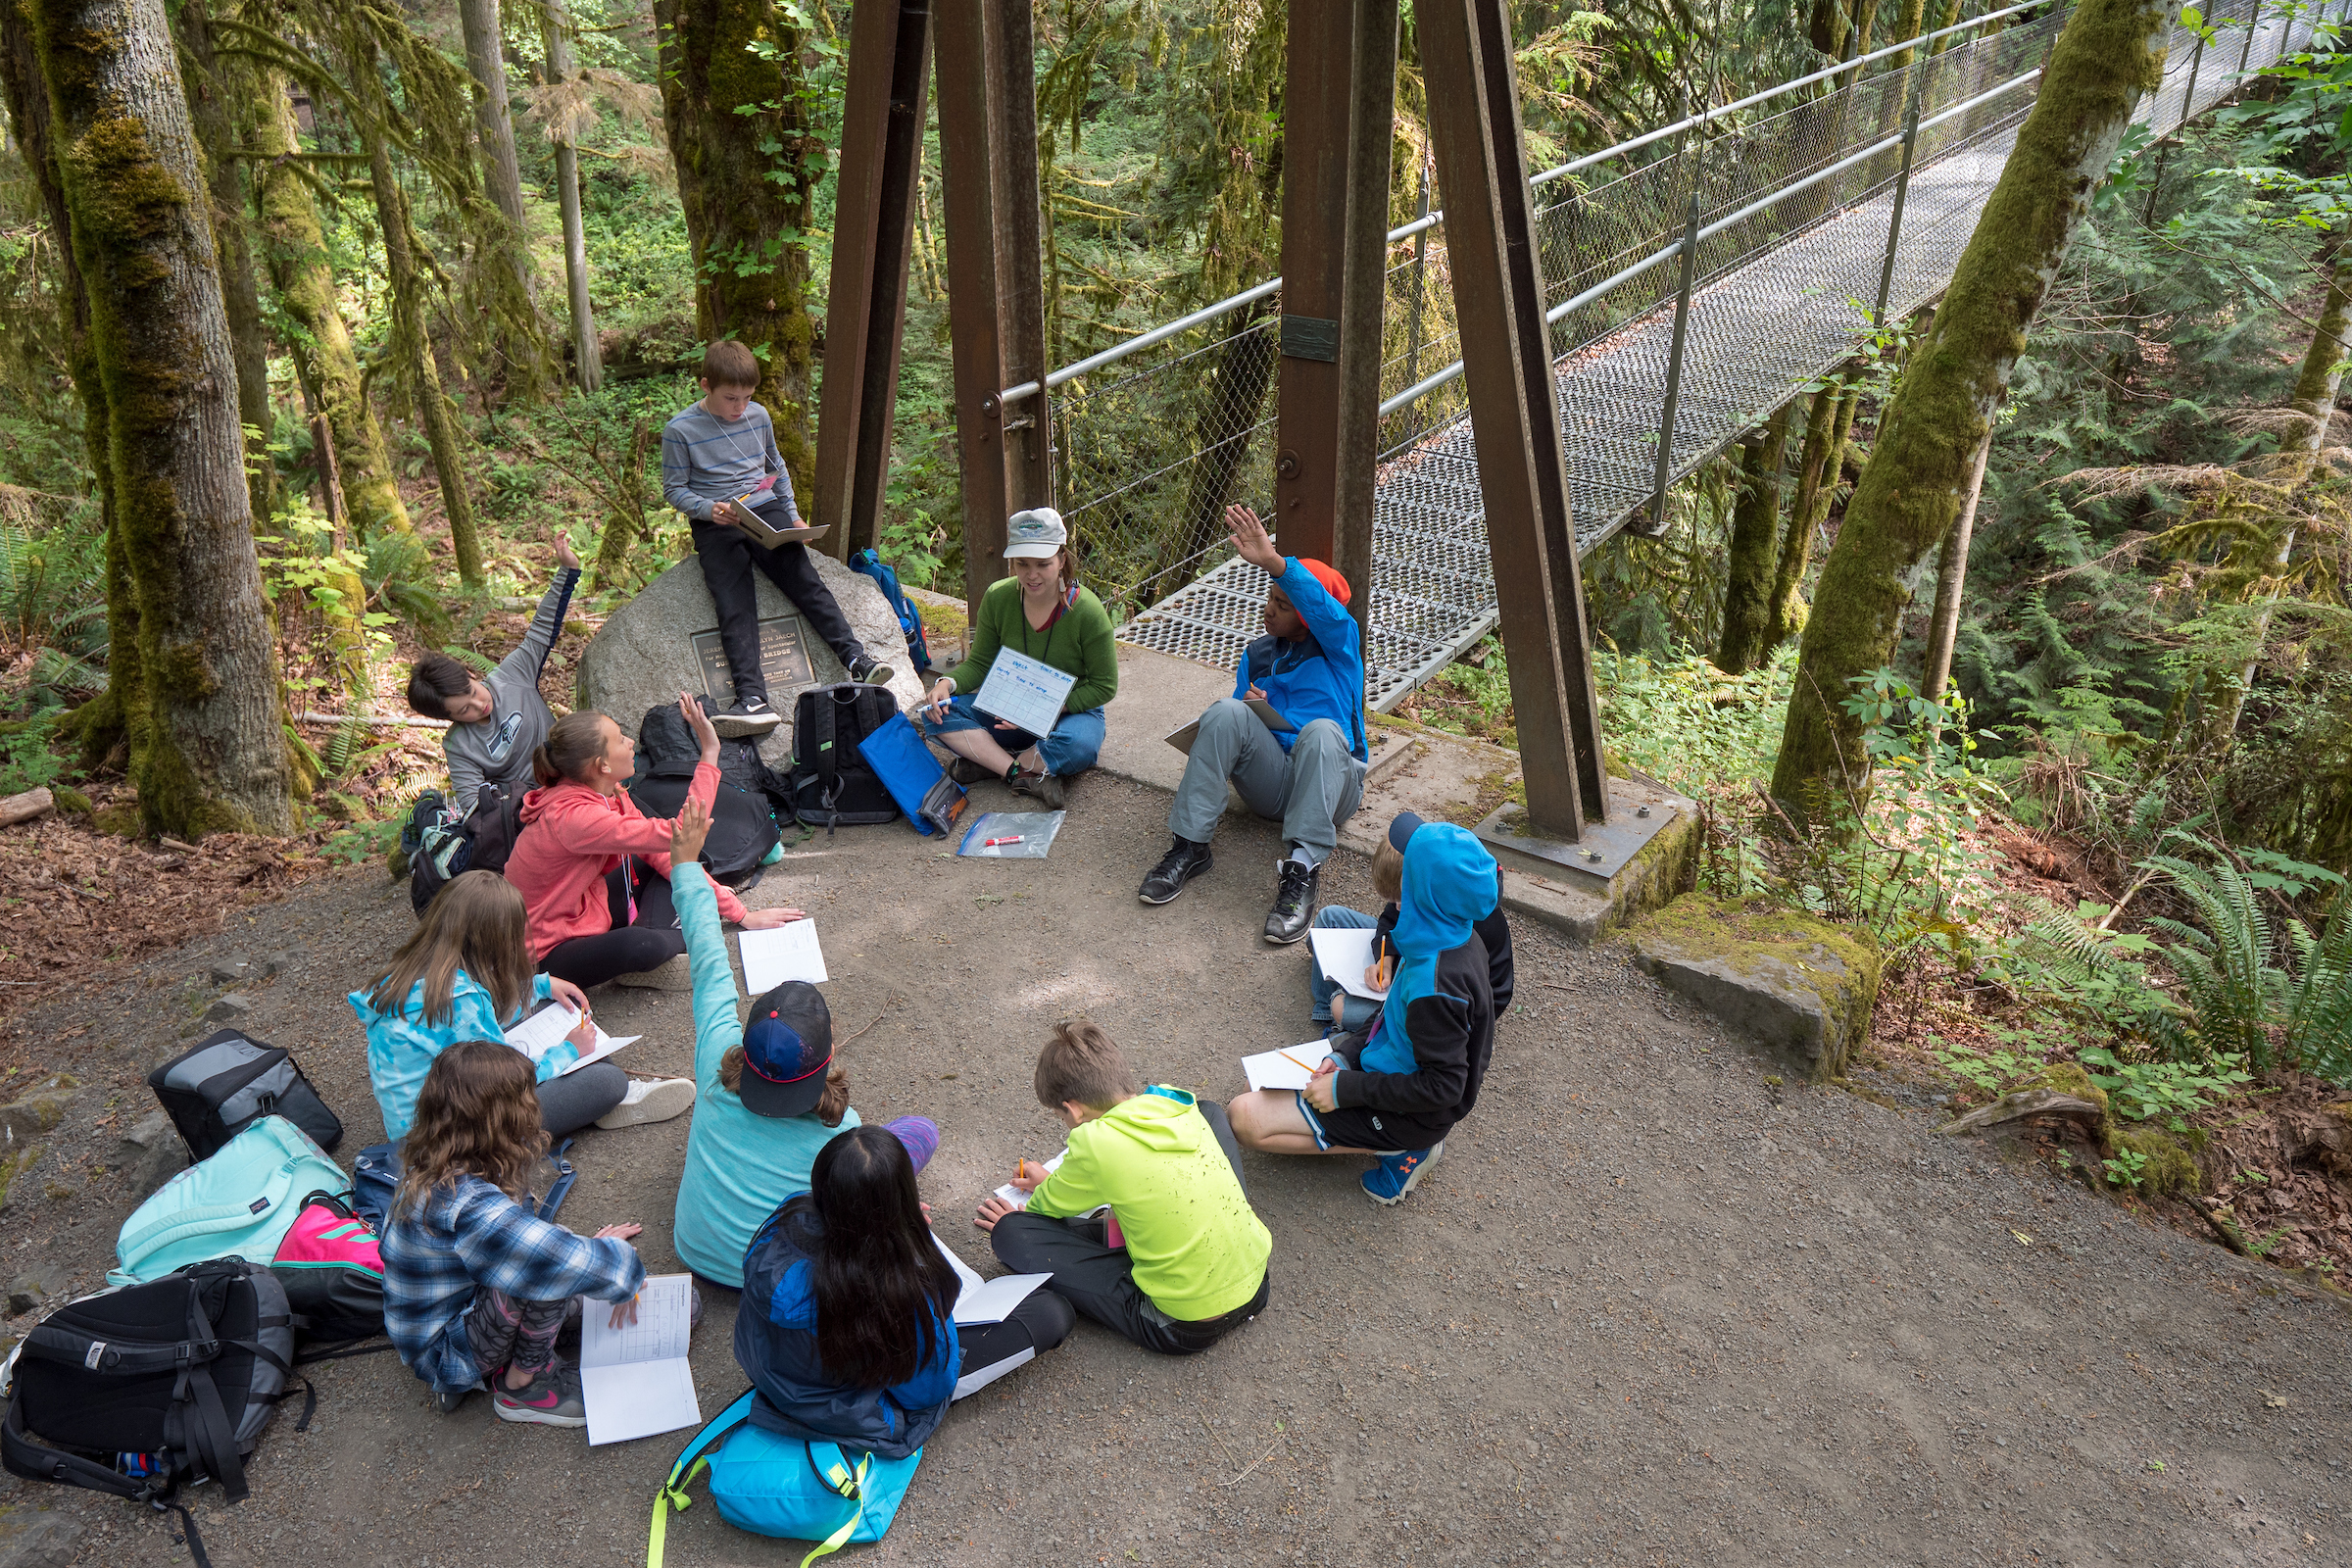 An IslandWood graduate student, in the Graduate Program in Environmental Education & Equity,s sits in a circle with students in the School Overnight Program. Behind them is the suspension bridge